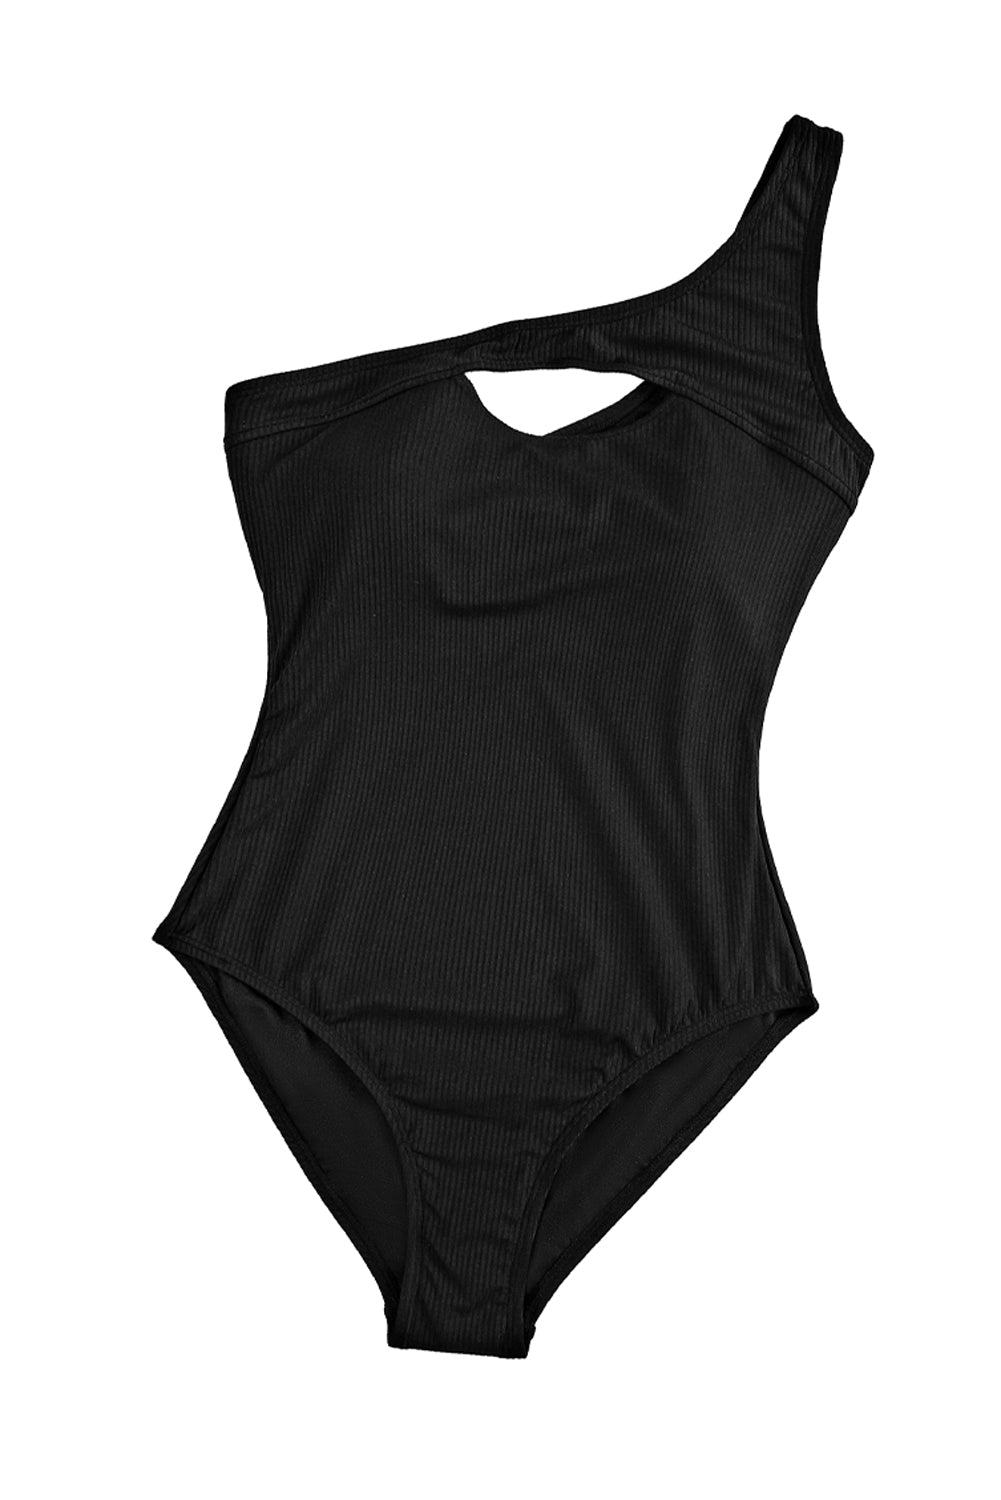 Blue Zone Planet |  Black Ribbed One Shoulder Hollowed One Piece Swimsuit Blue Zone Planet